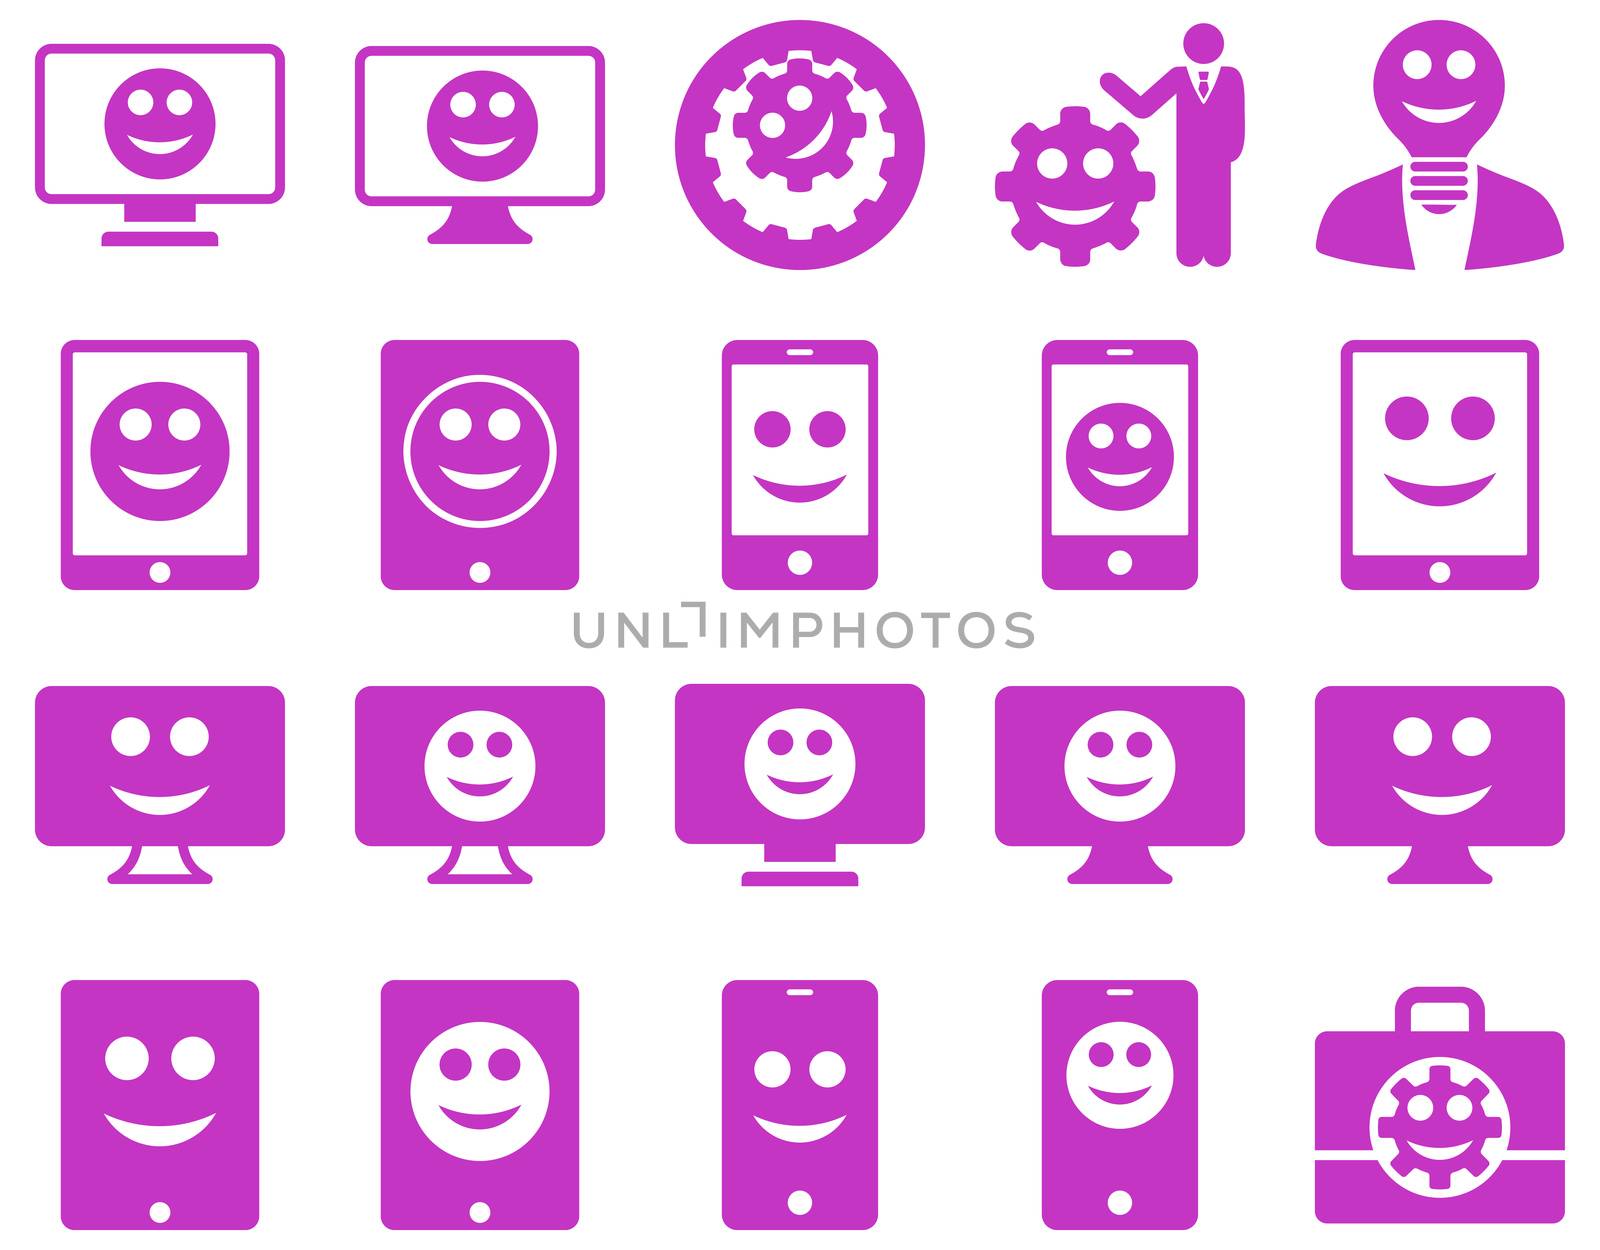 Tools, options, smiles, displays, devices icons. Glyph set style is flat images, violet symbols, isolated on a white background.